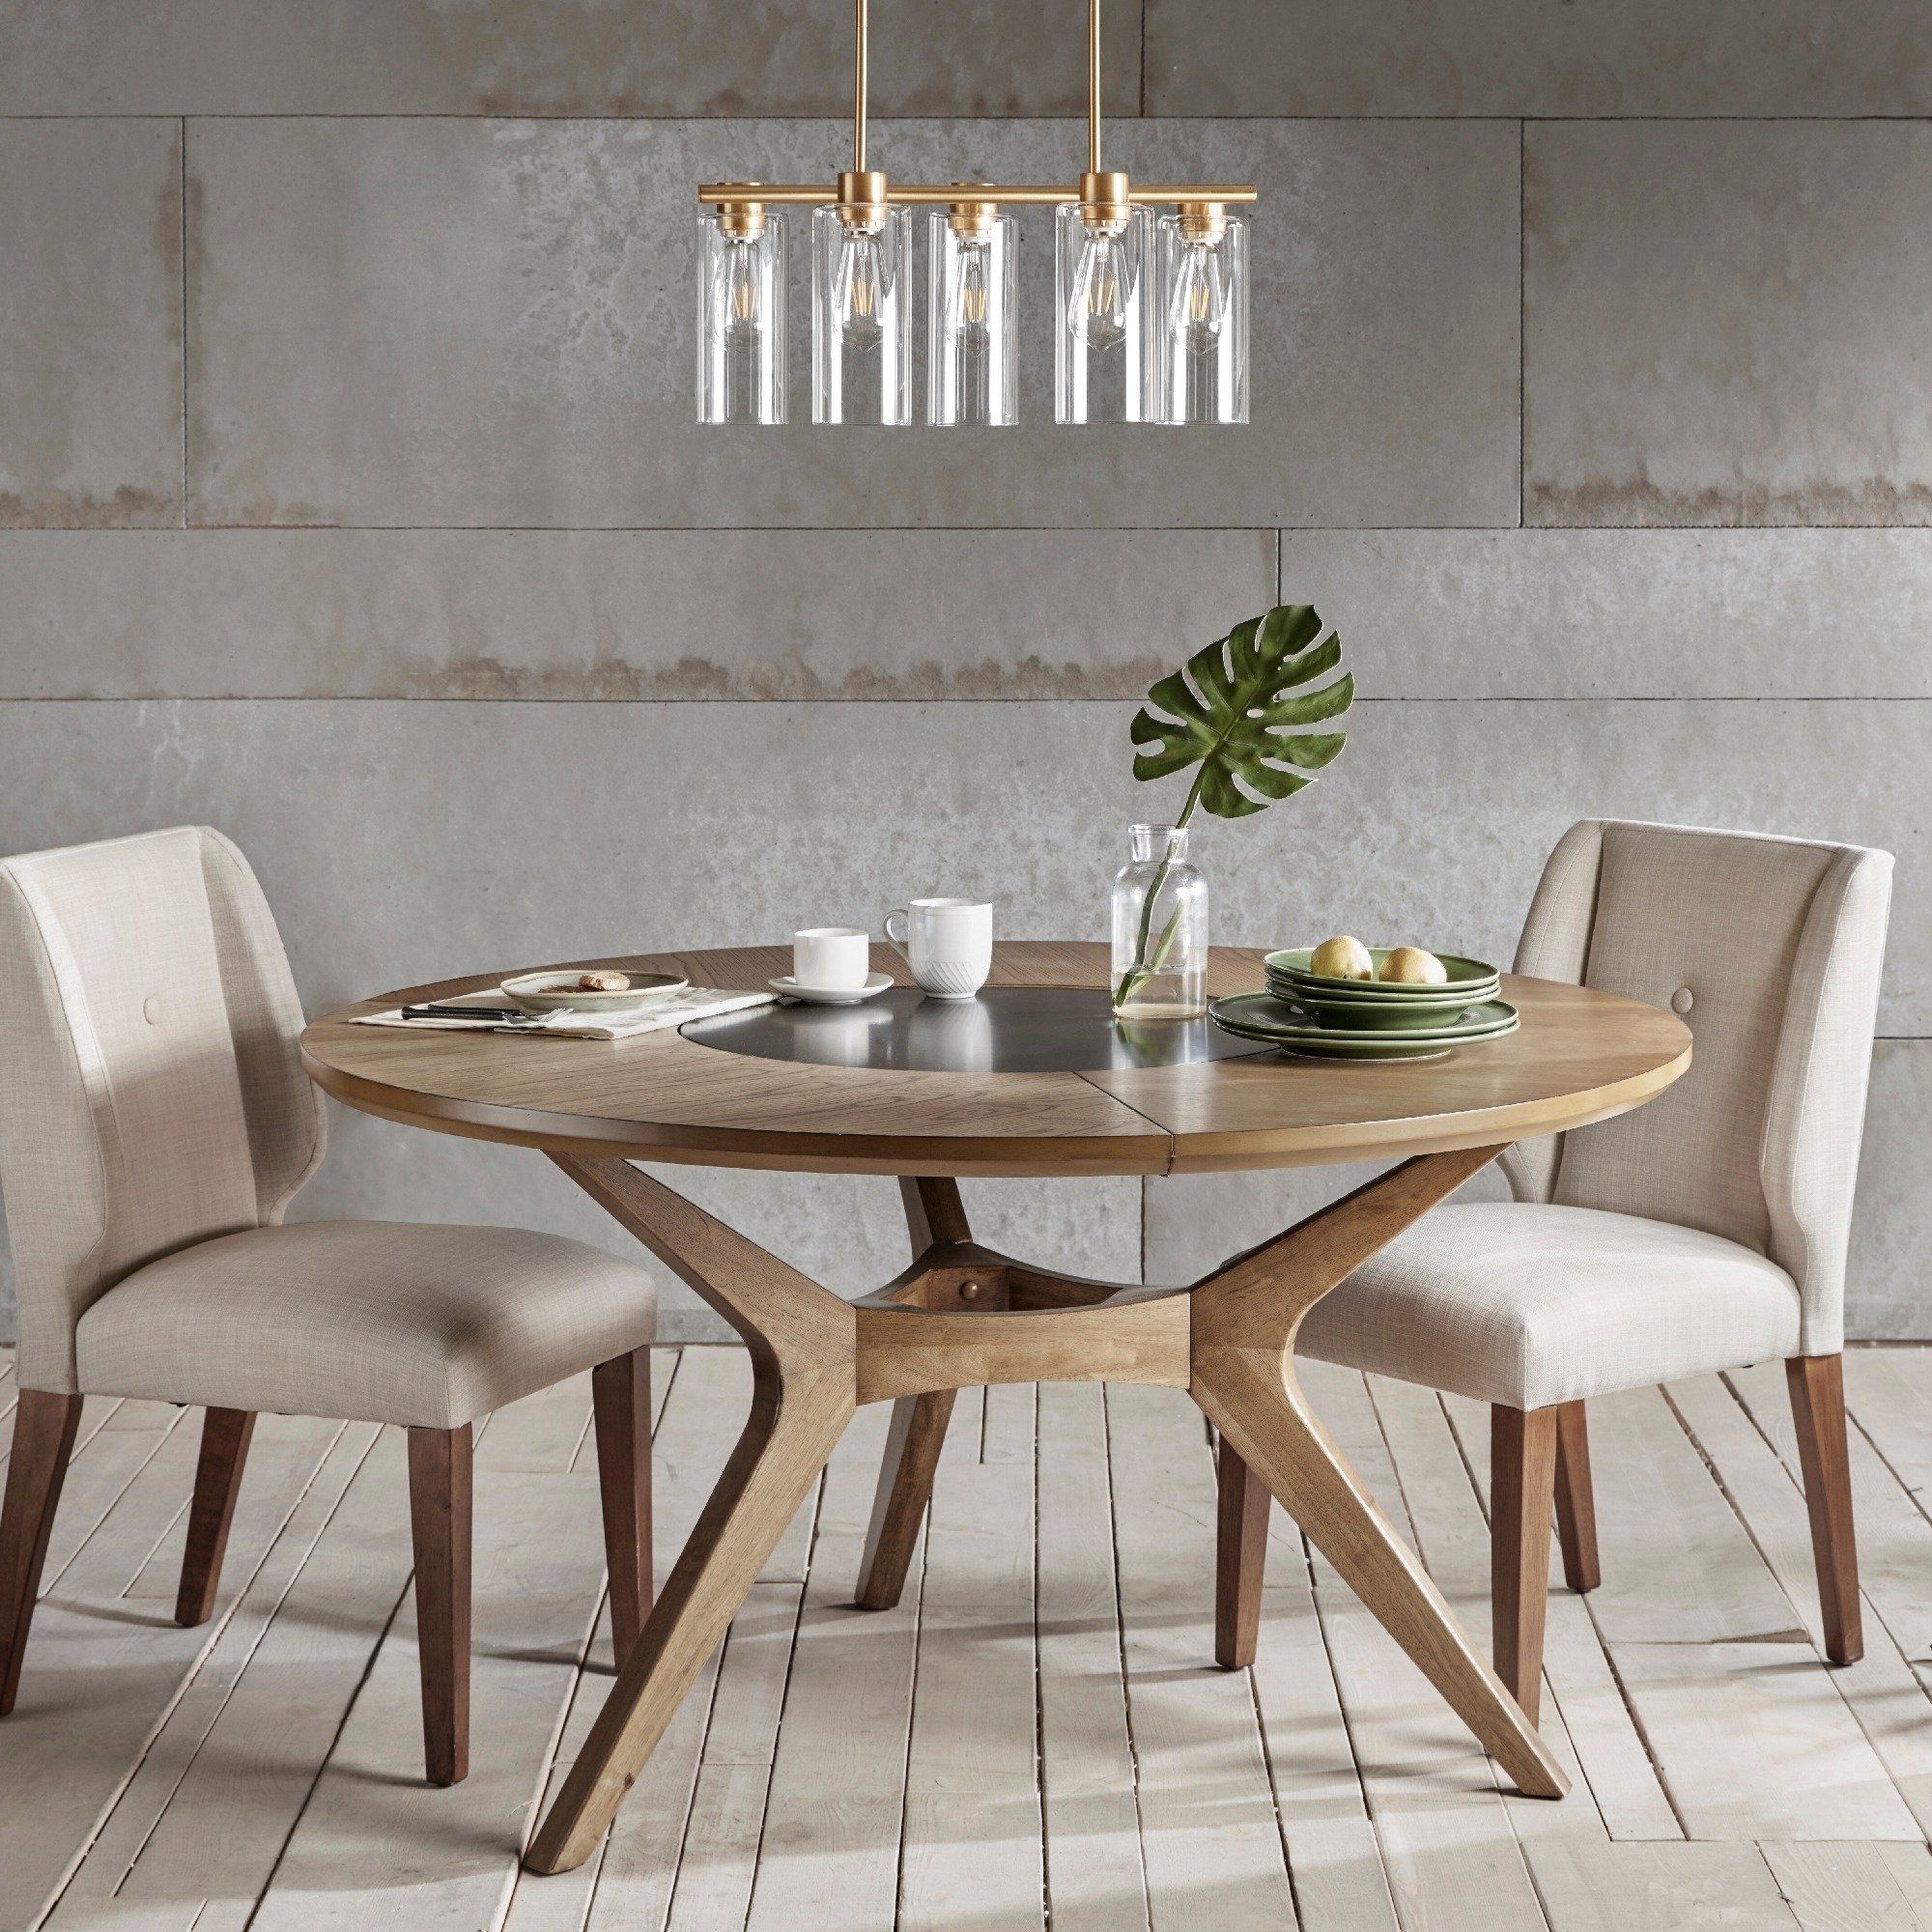 2017 Metro Dining Tables Throughout Shop Ink+Ivy Metro Natural Oak Round Dining Table – Free Shipping (View 23 of 25)